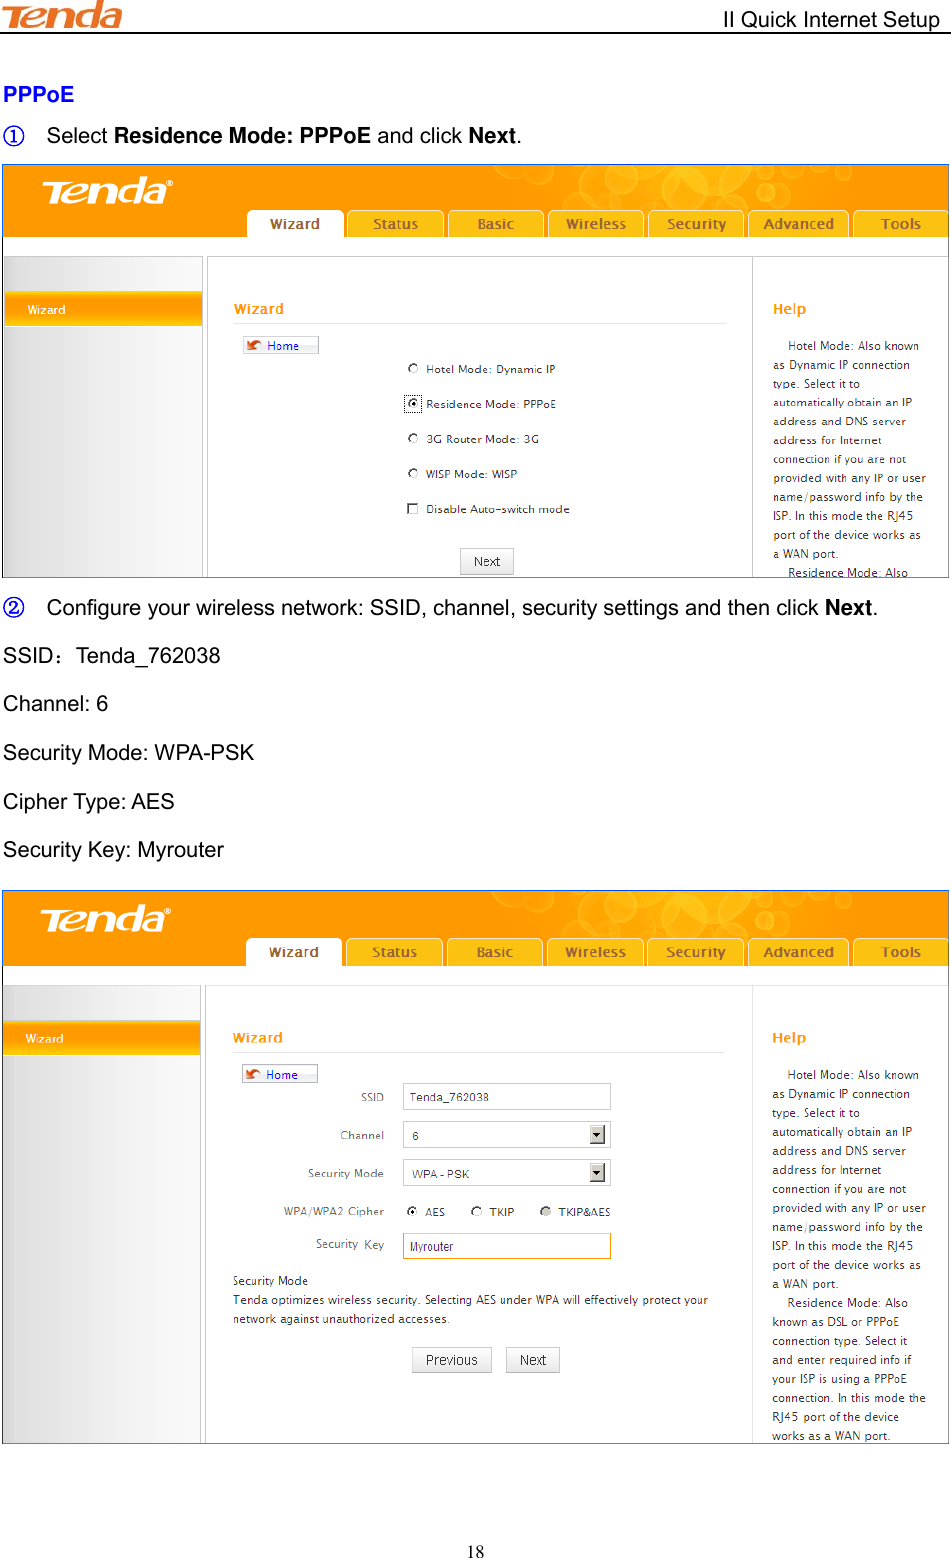                                                        II Quick Internet Setup         18 PPPoE ① Select Residence Mode: PPPoE and click Next.  ② Configure your wireless network: SSID, channel, security settings and then click Next. SSID：Tenda_762038 Channel: 6 Security Mode: WPA-PSK             Cipher Type: AES           Security Key: Myrouter  